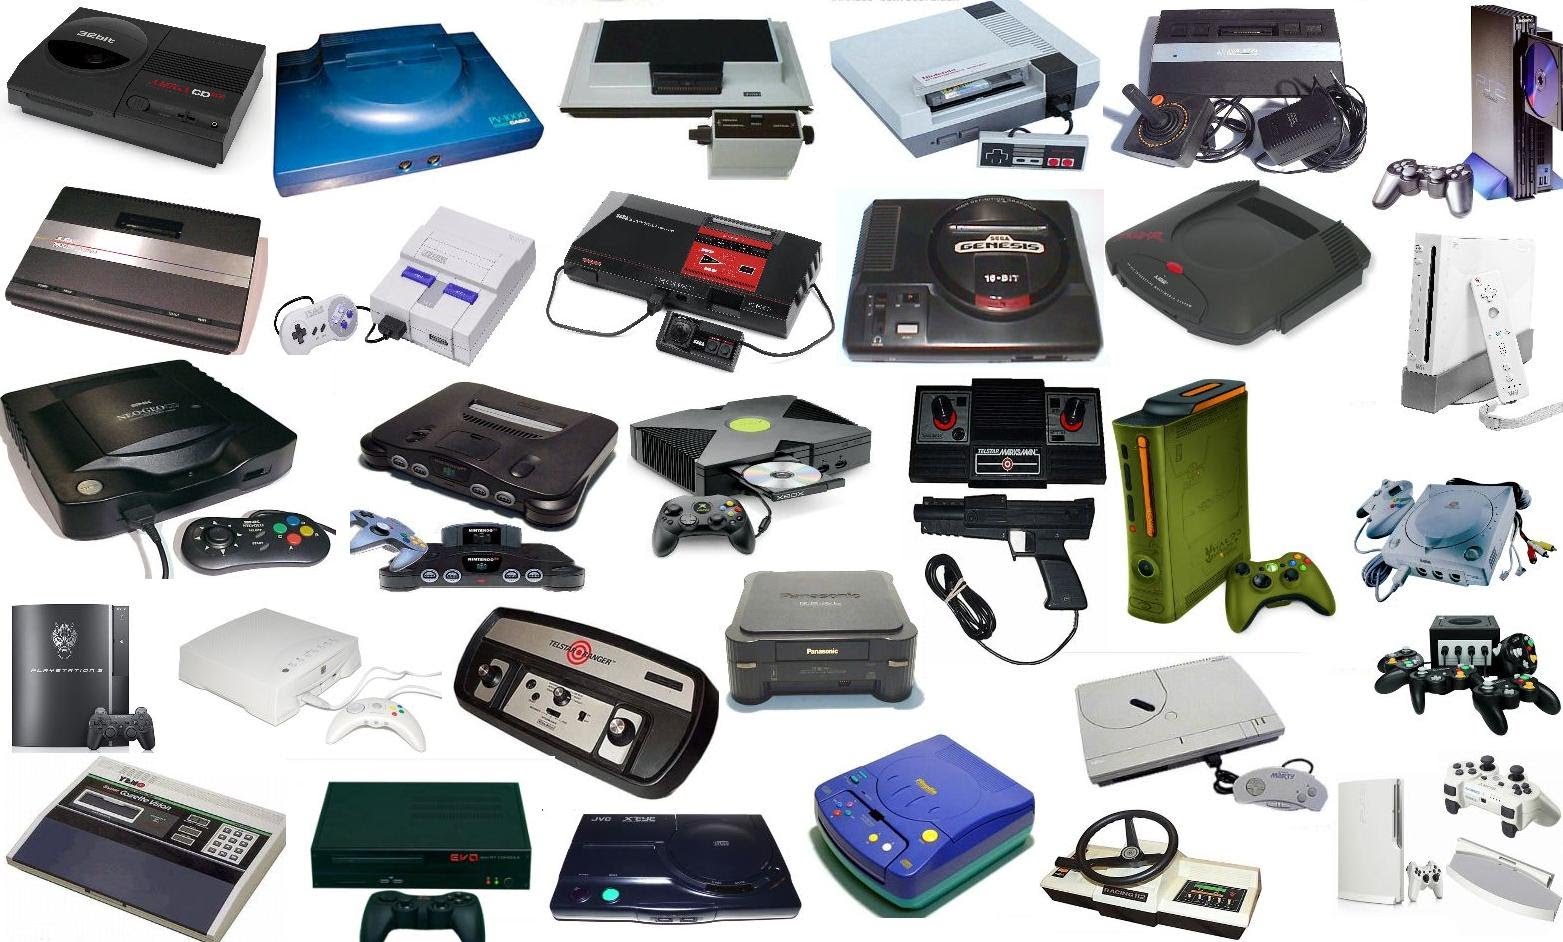 50 Video Games That Changed The History Of Gaming